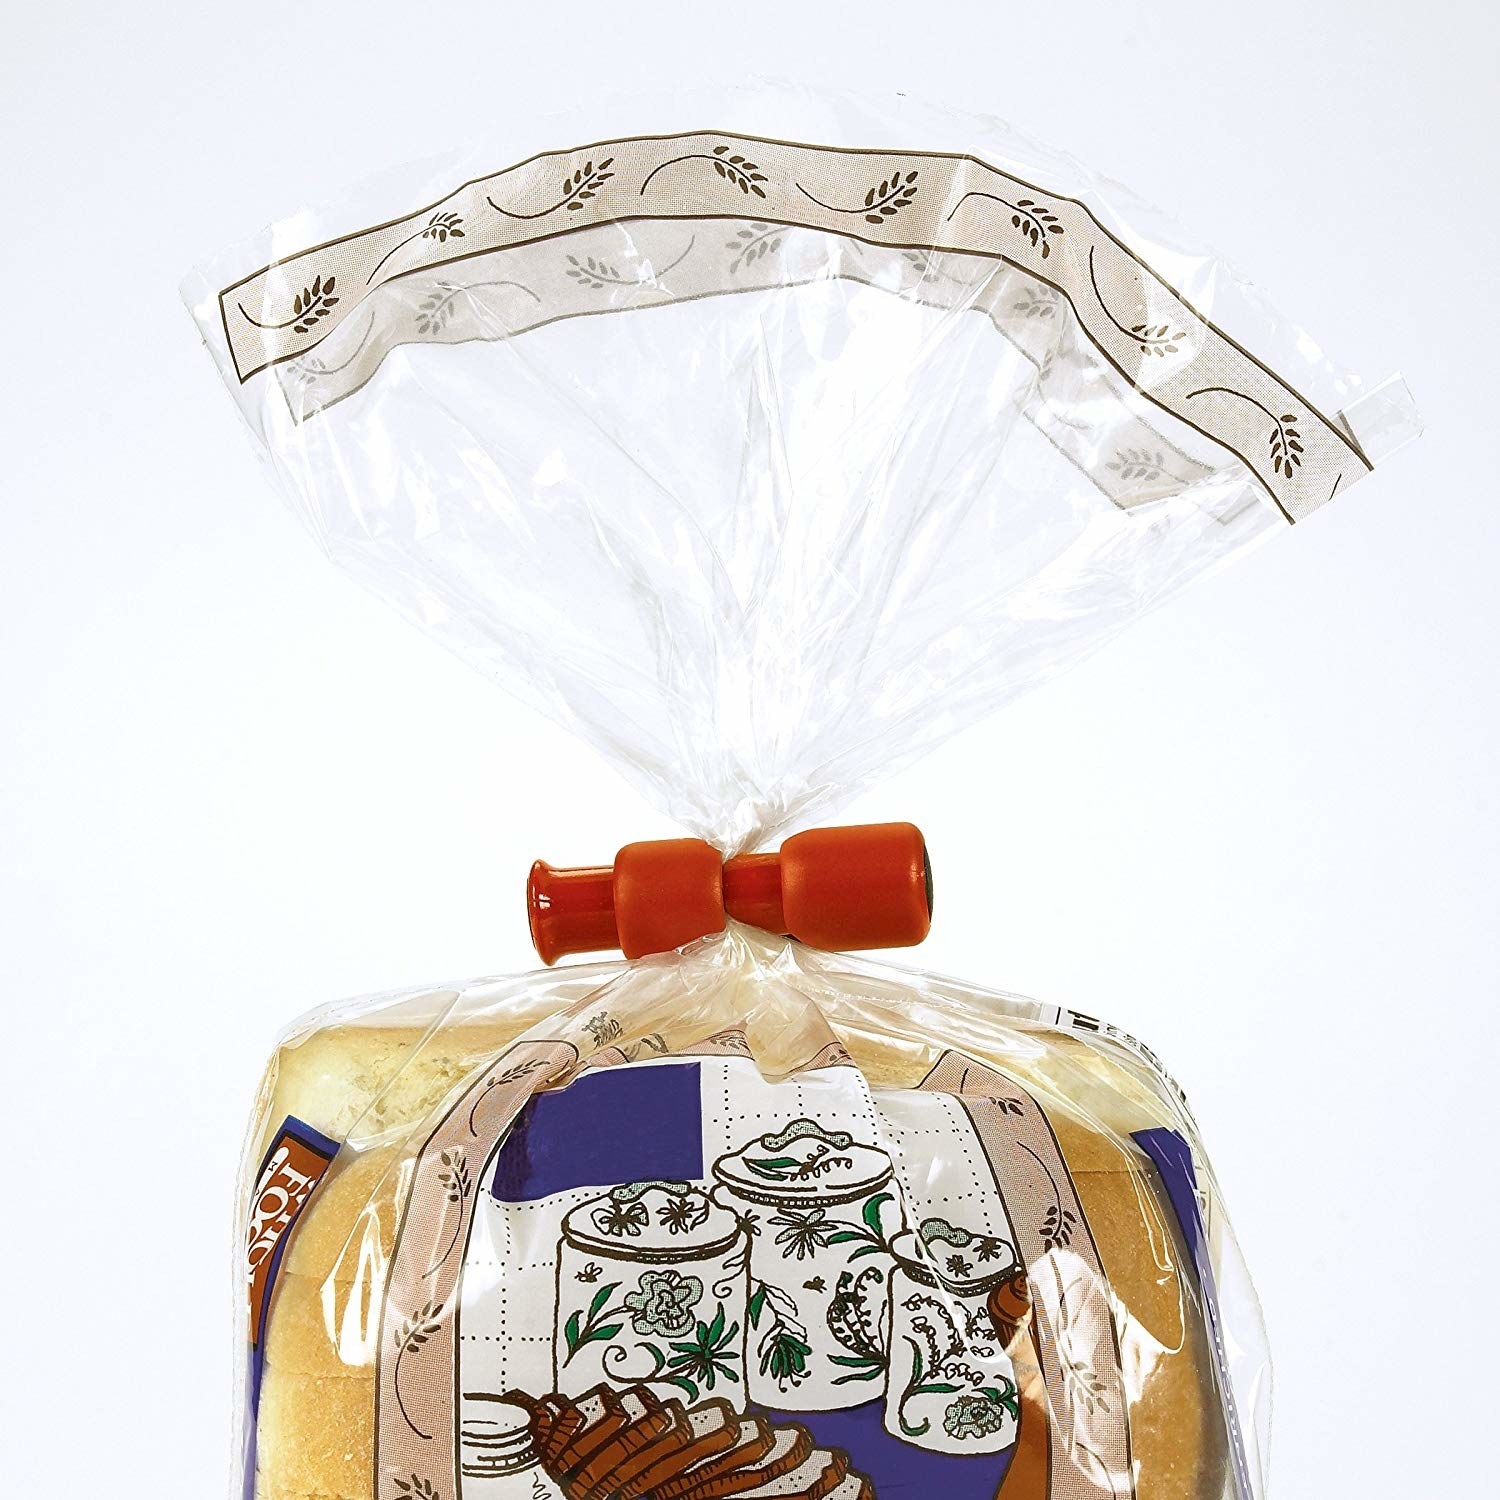 A bag of bread with the red closure